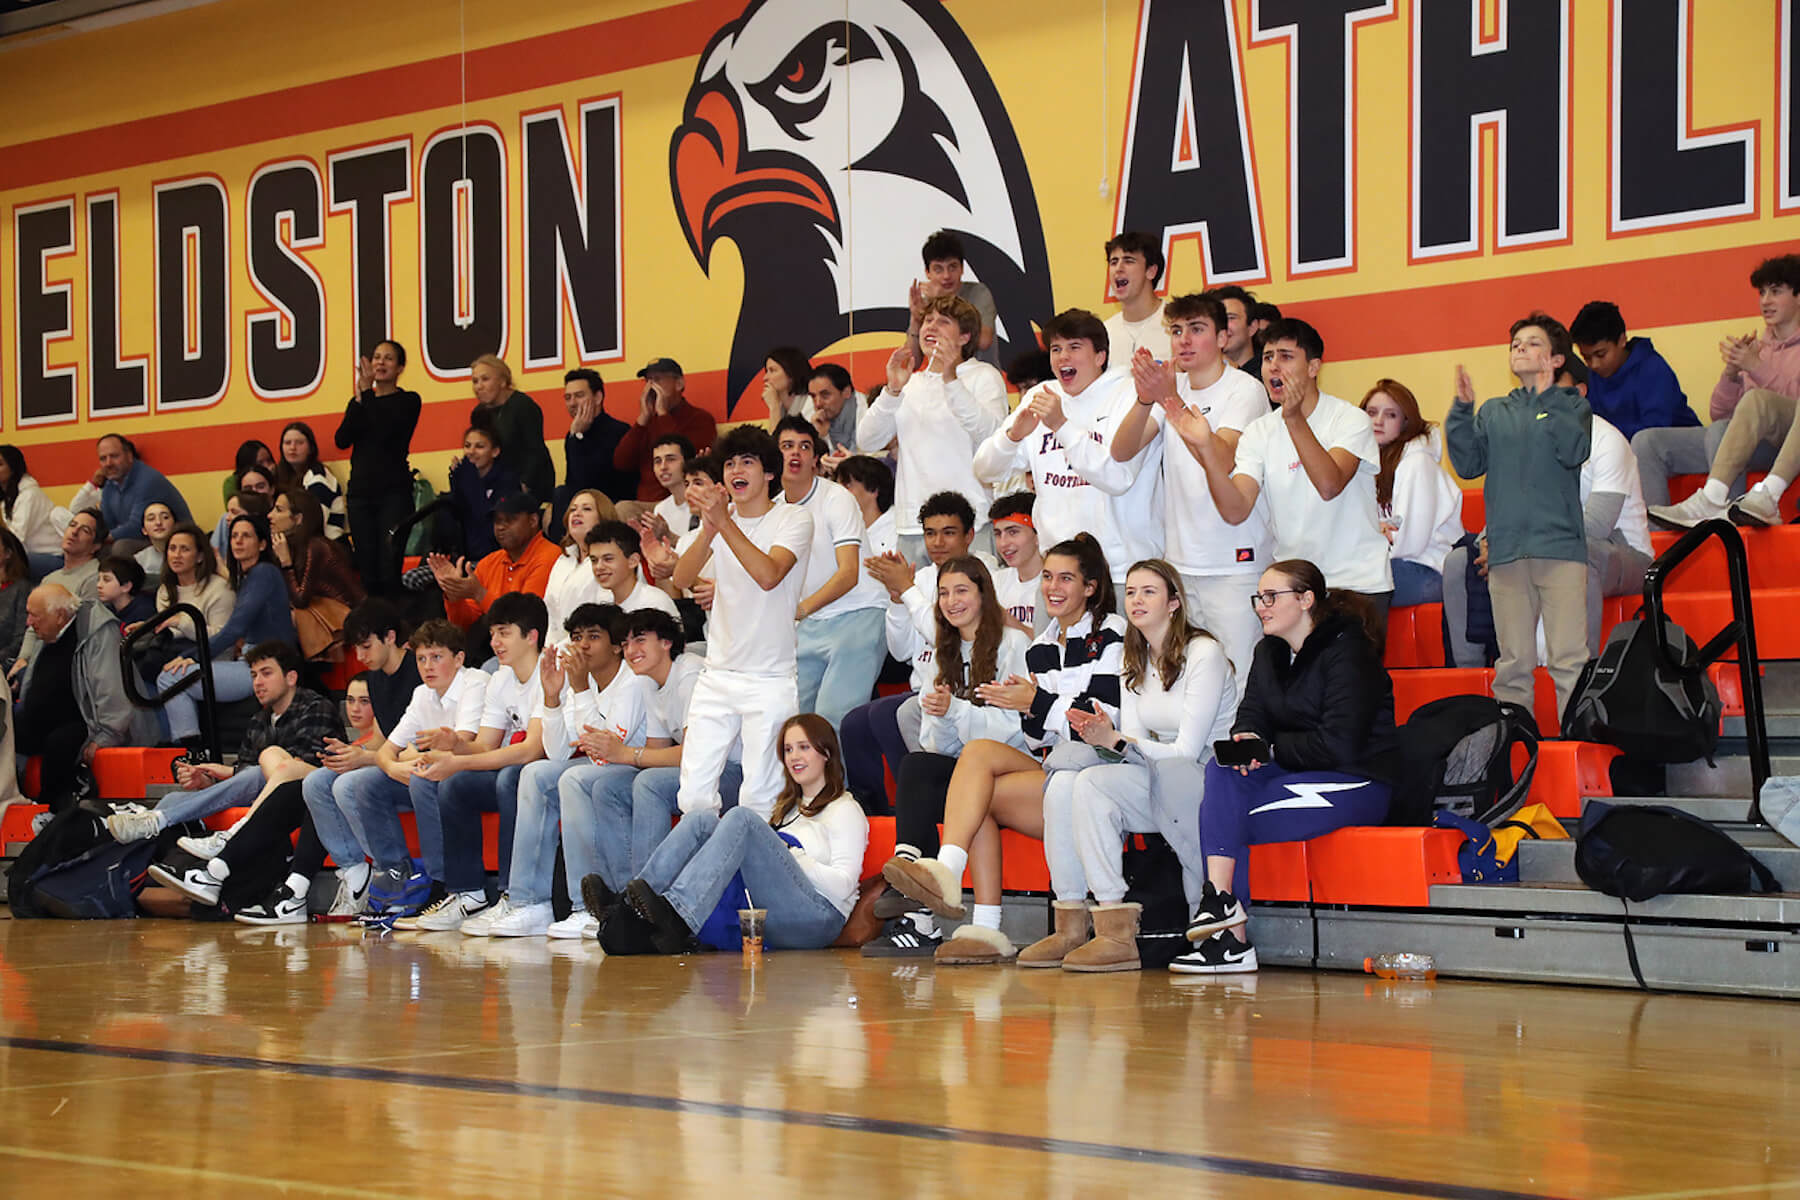 Fieldston students, wearing mostly white, cheer and smile in the bleachers as they cheer on student athletes at Winterfest.